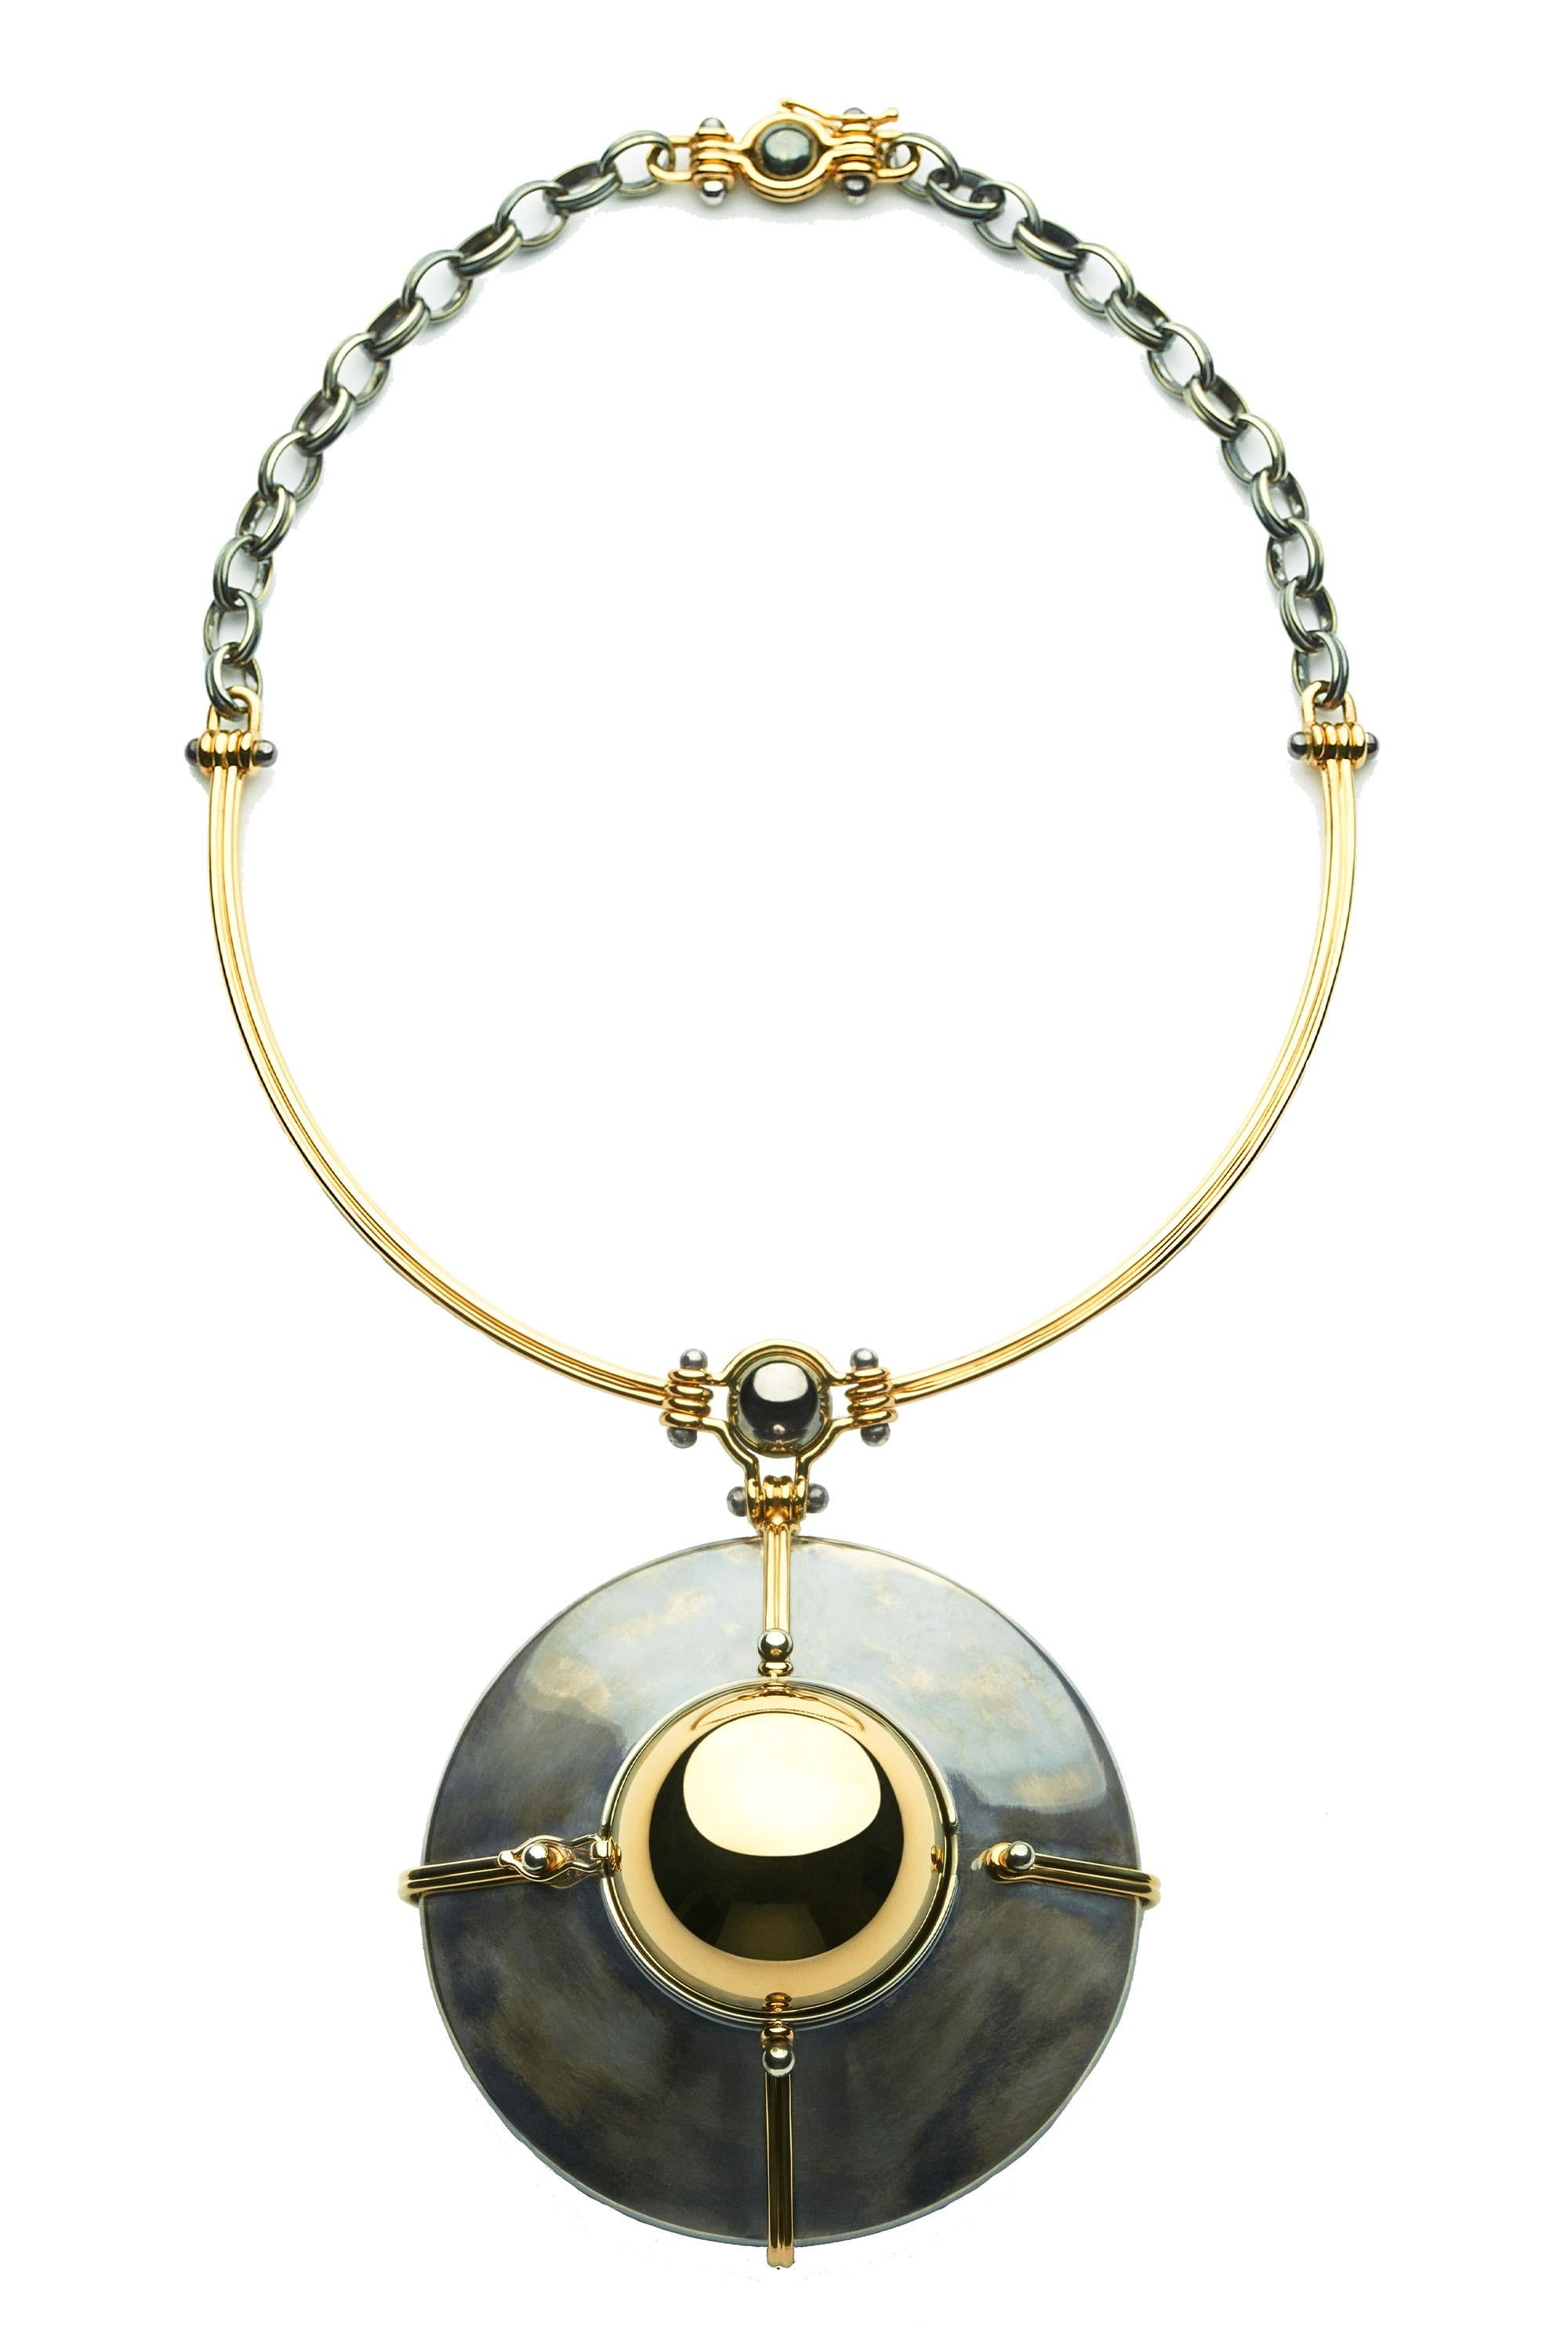 Choker pendant in yellow gold and distressed silver. A rotating sphere revealing a planet of diamonds encircled by a yellow and white gold cage, set with diamonds. 

Yellow gold wire and distressed silver chain.

Details:
190 Diamonds: 0.7 cts
18k